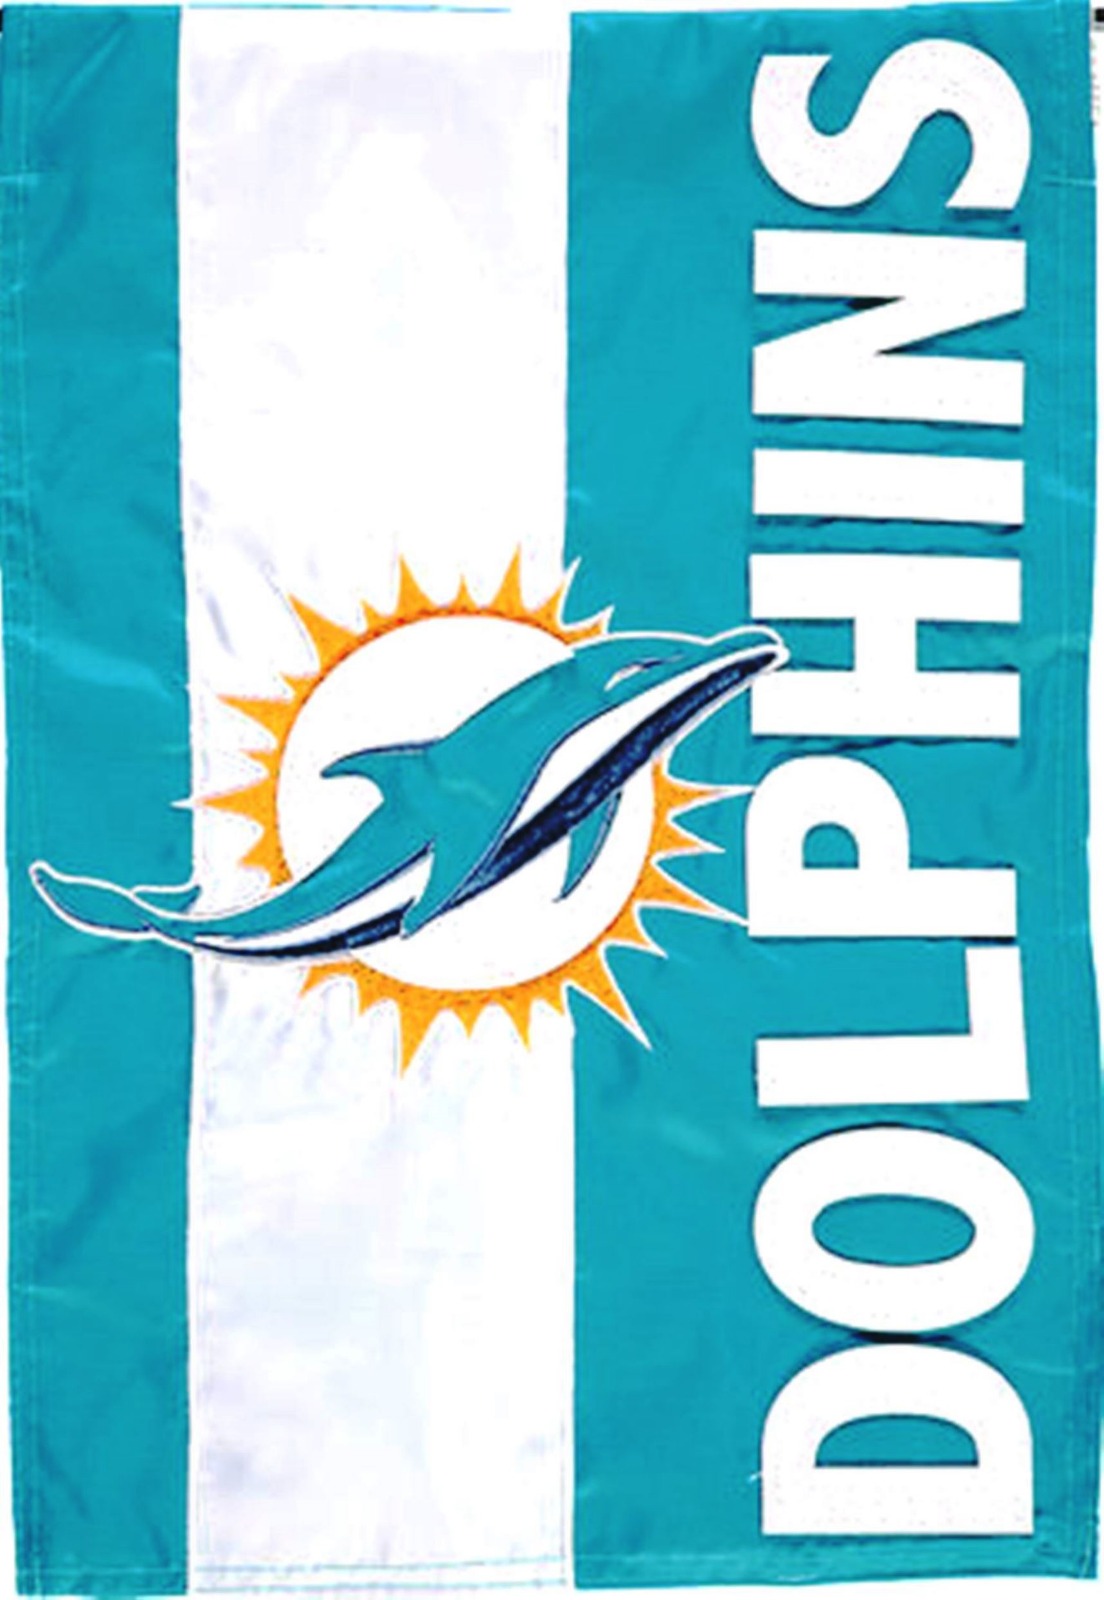 Miami Dolphins Premium Embellished 2-Sided 28x44 Banner Applique Flag ...